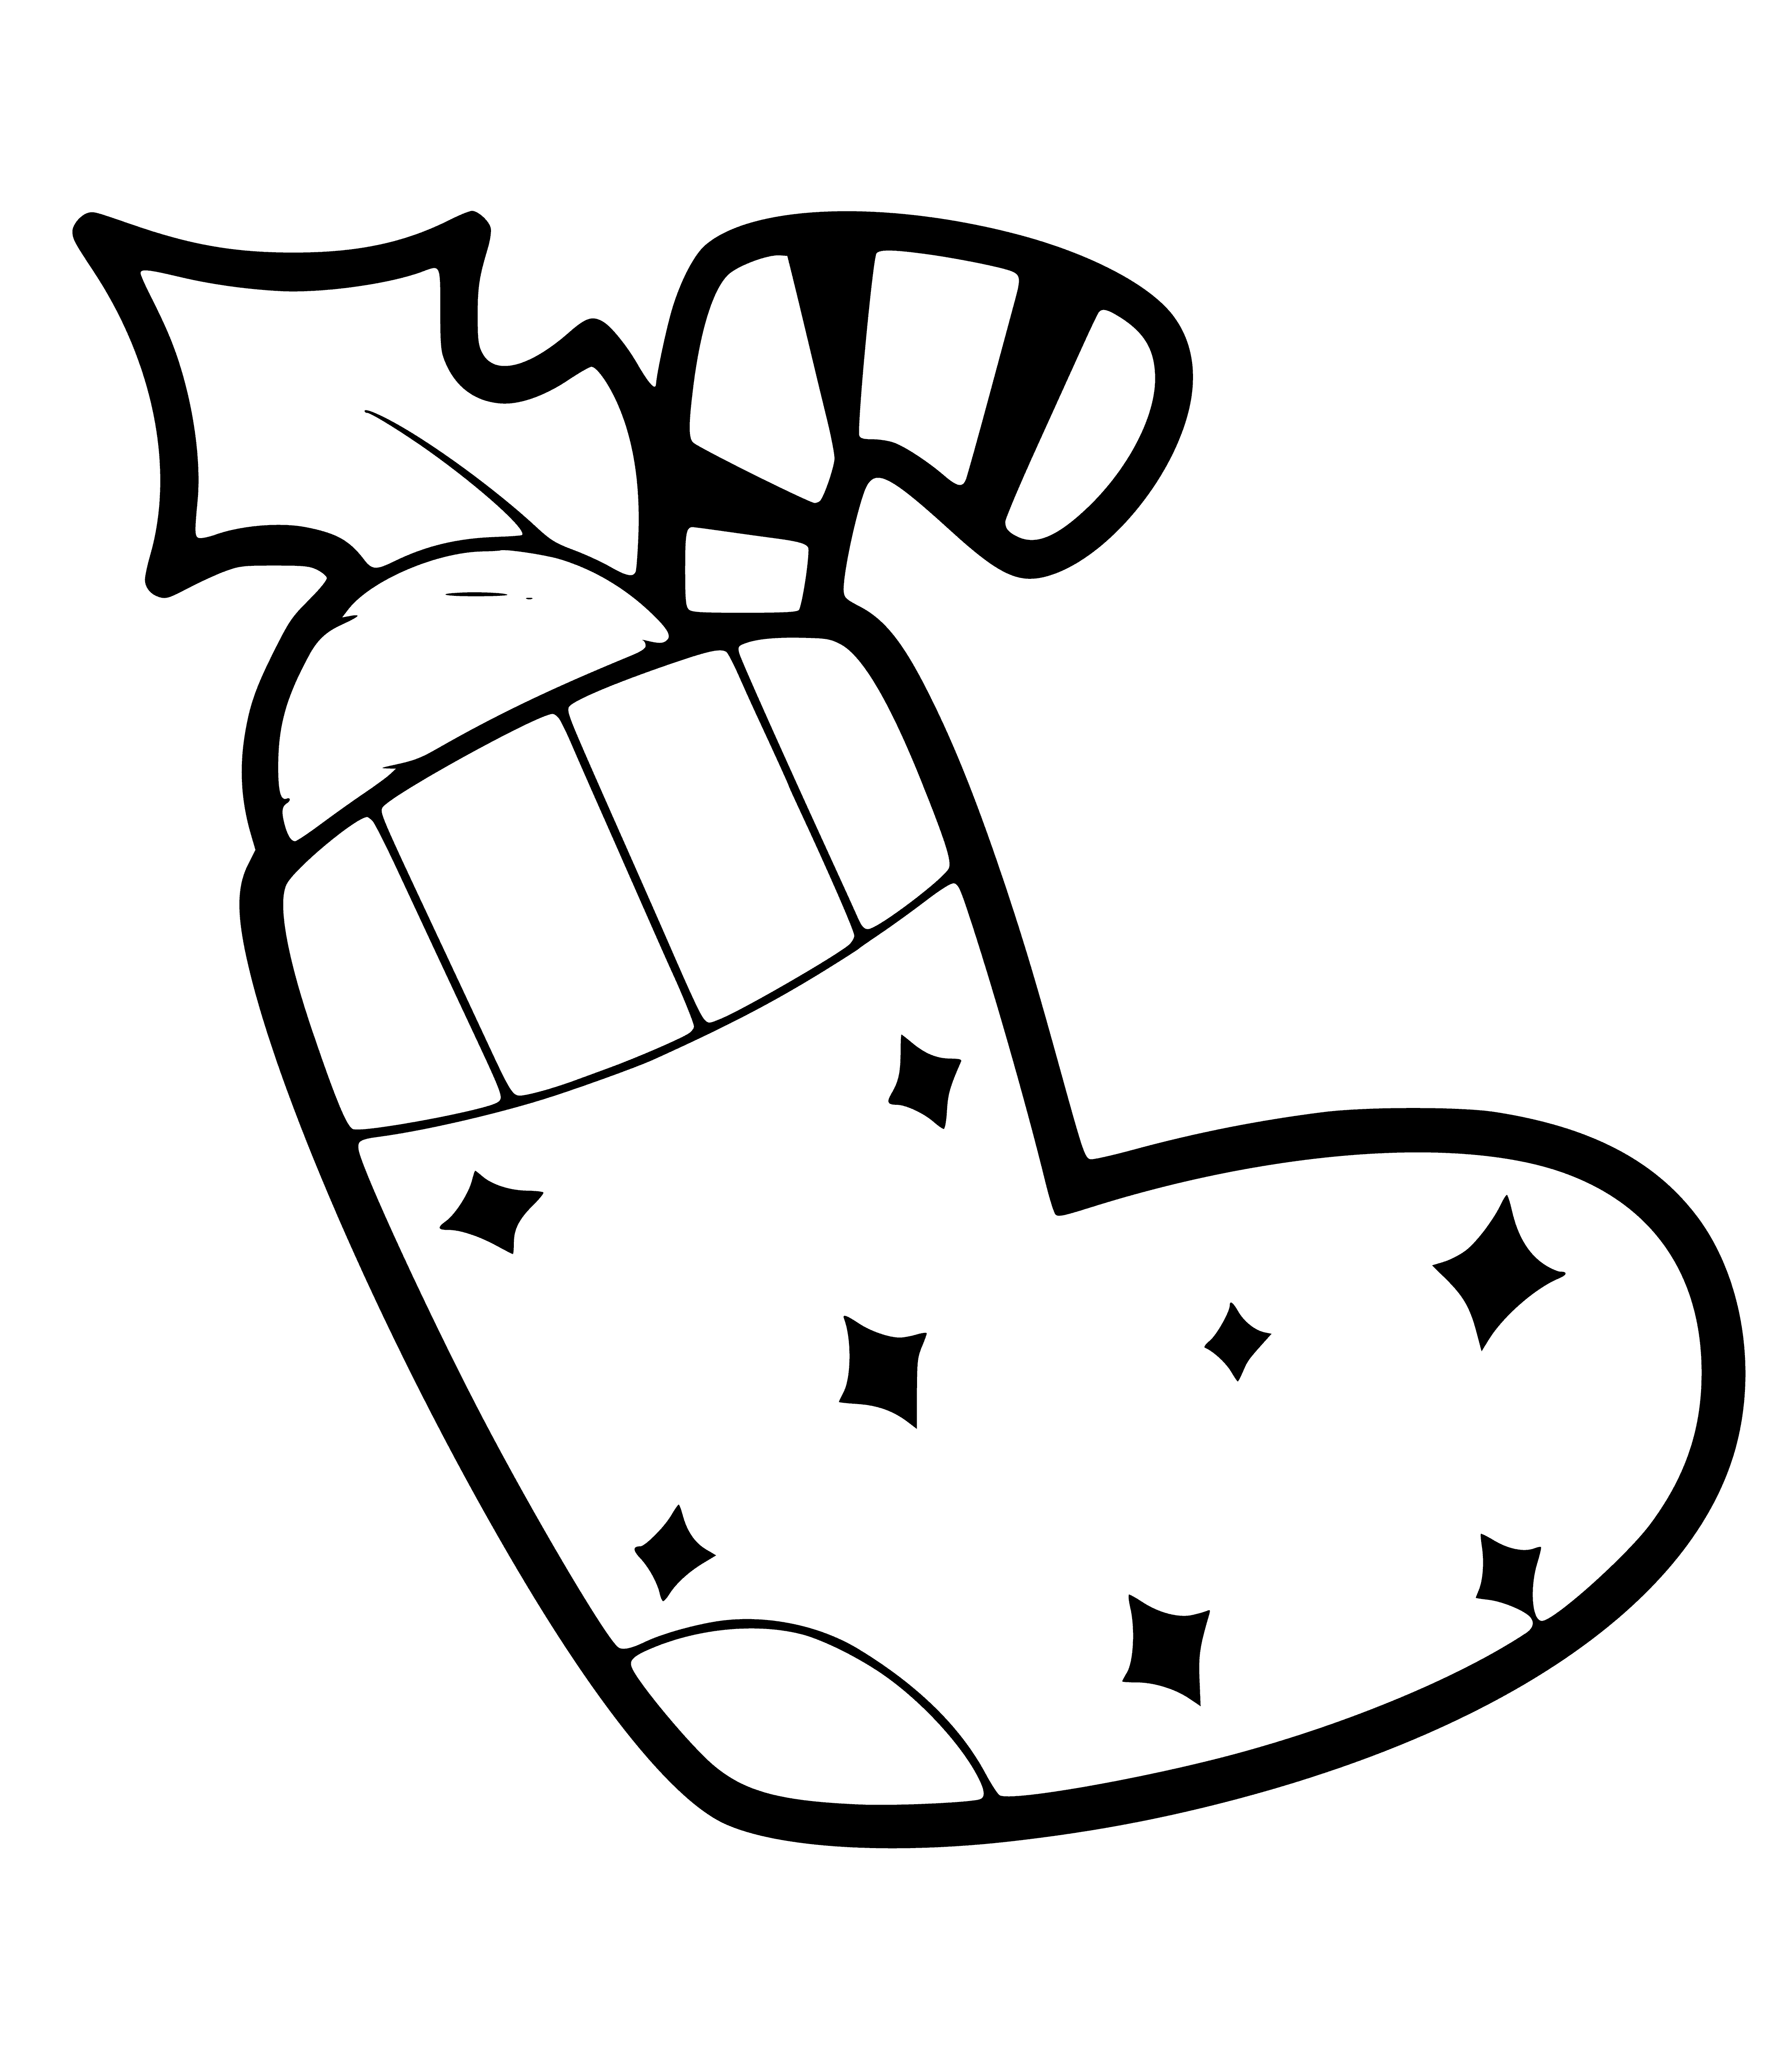 coloring page: Knee-high red and green Christmas socks with stripes and snowflakes - perfect for the holiday season!